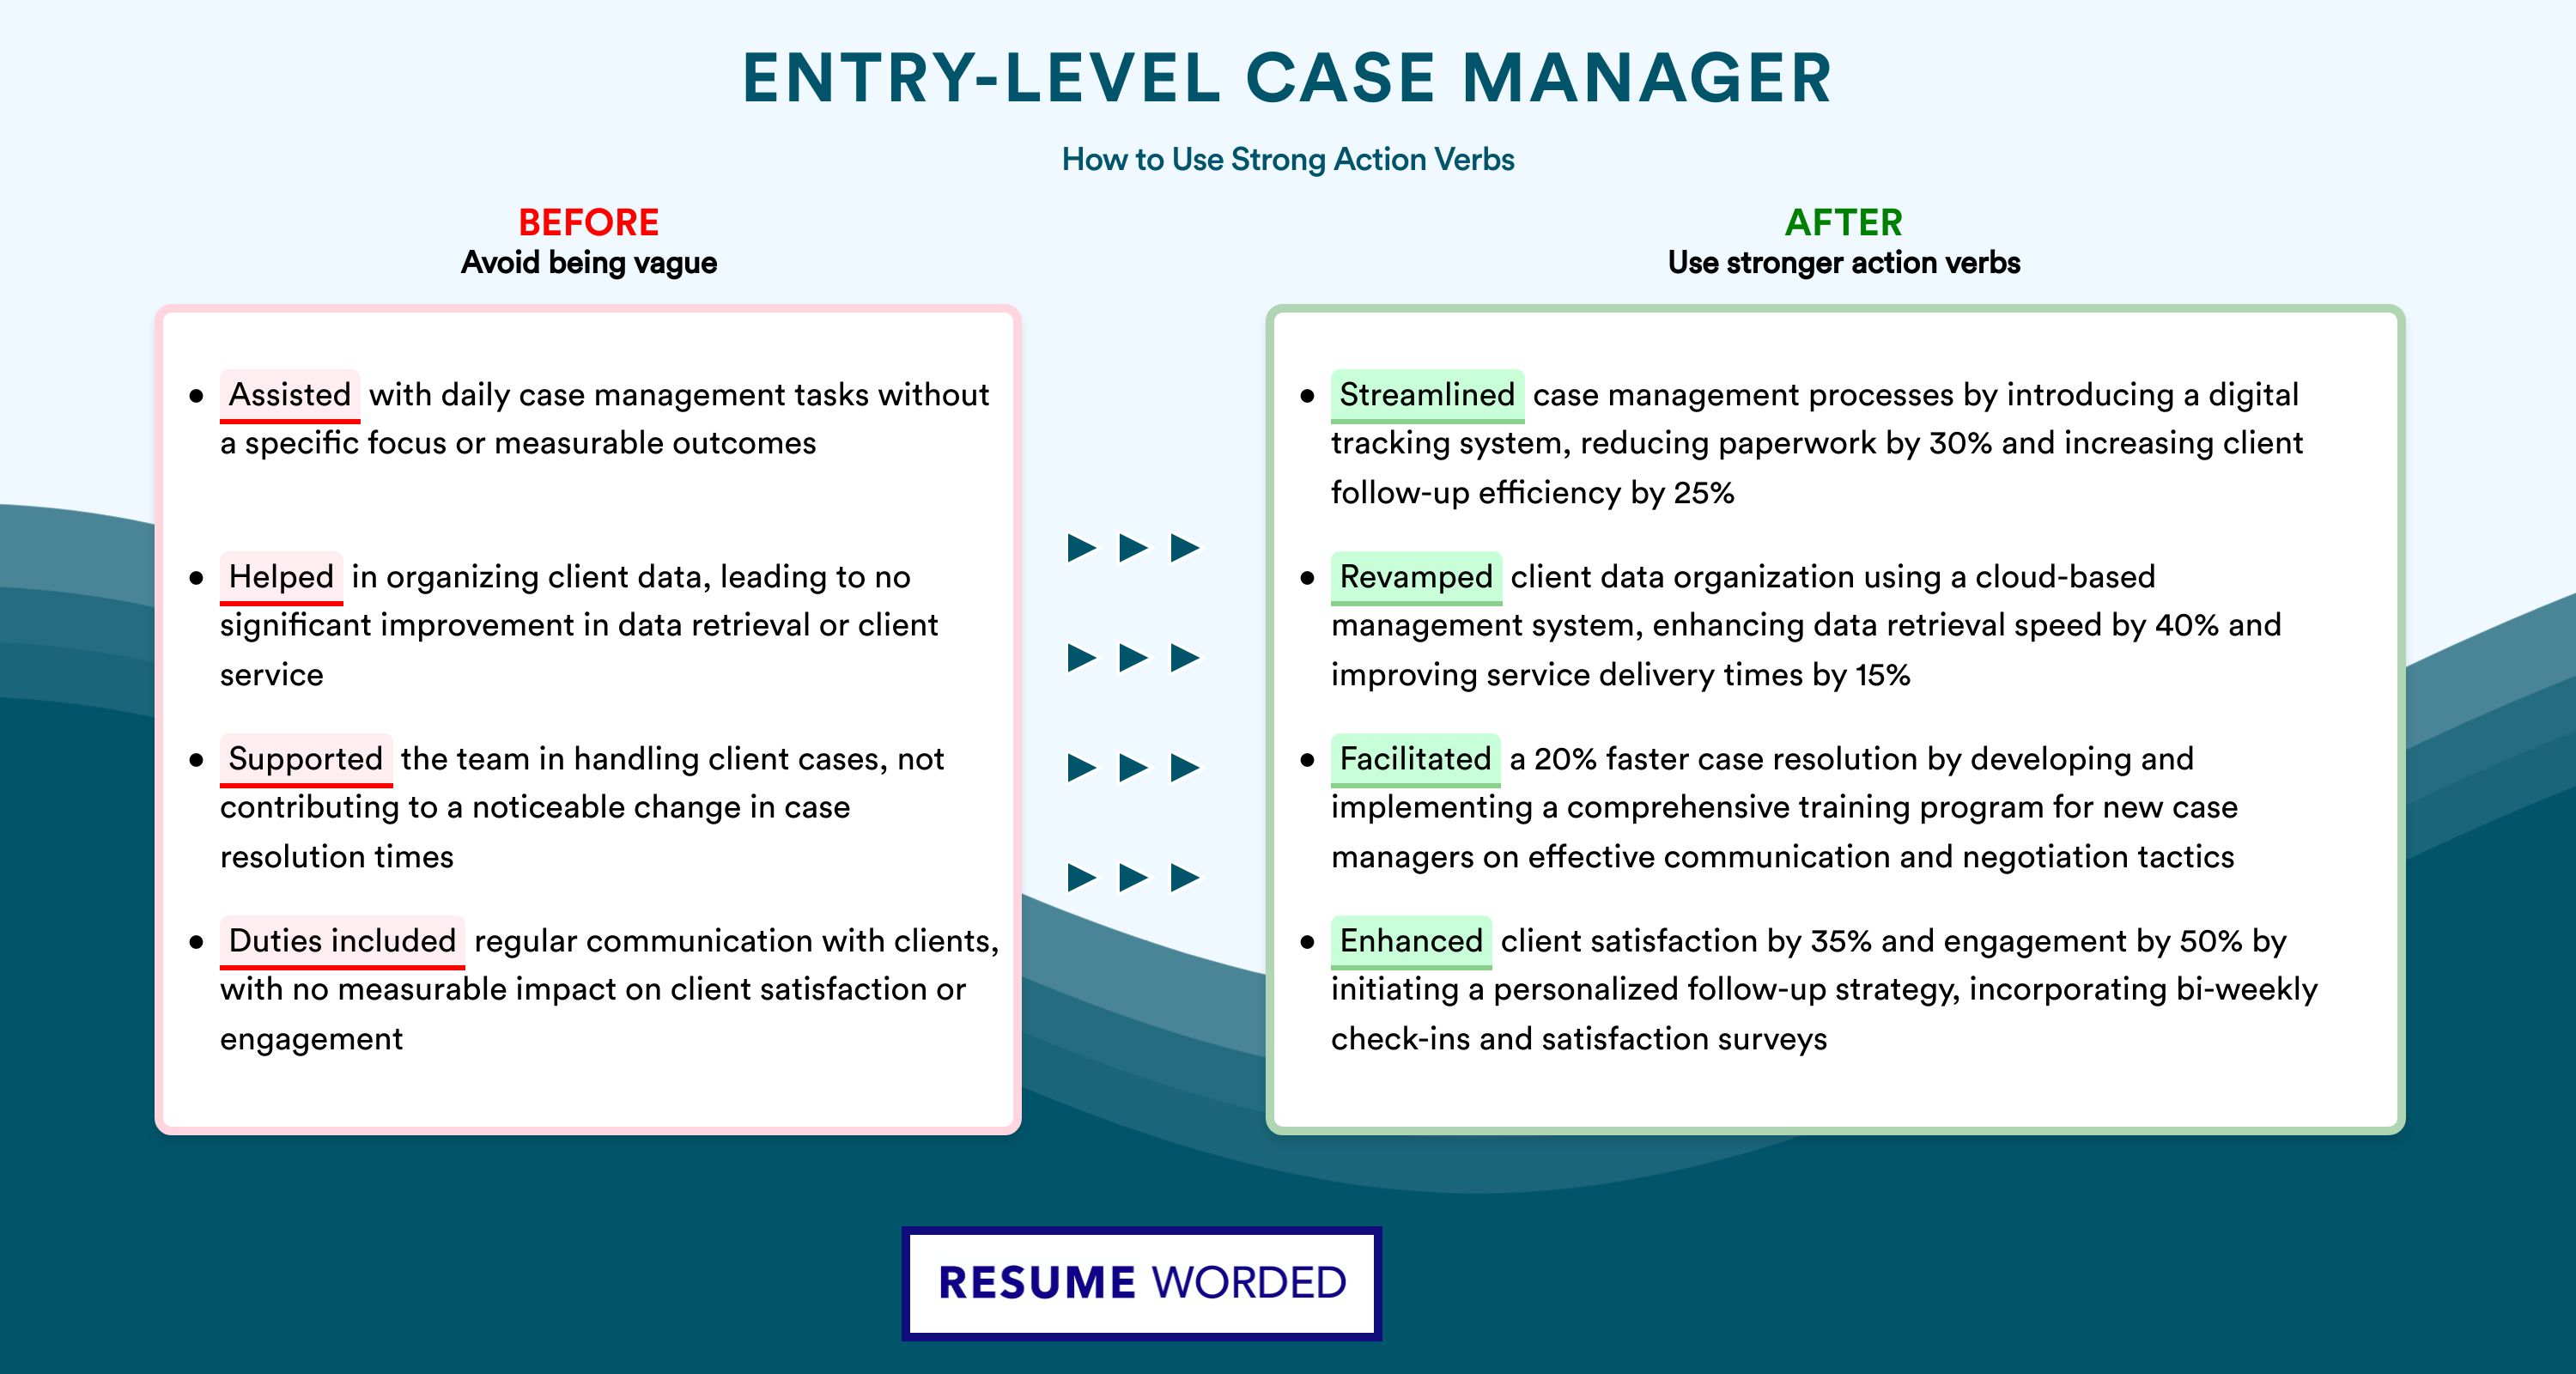 Action Verbs for Entry-Level Case Manager